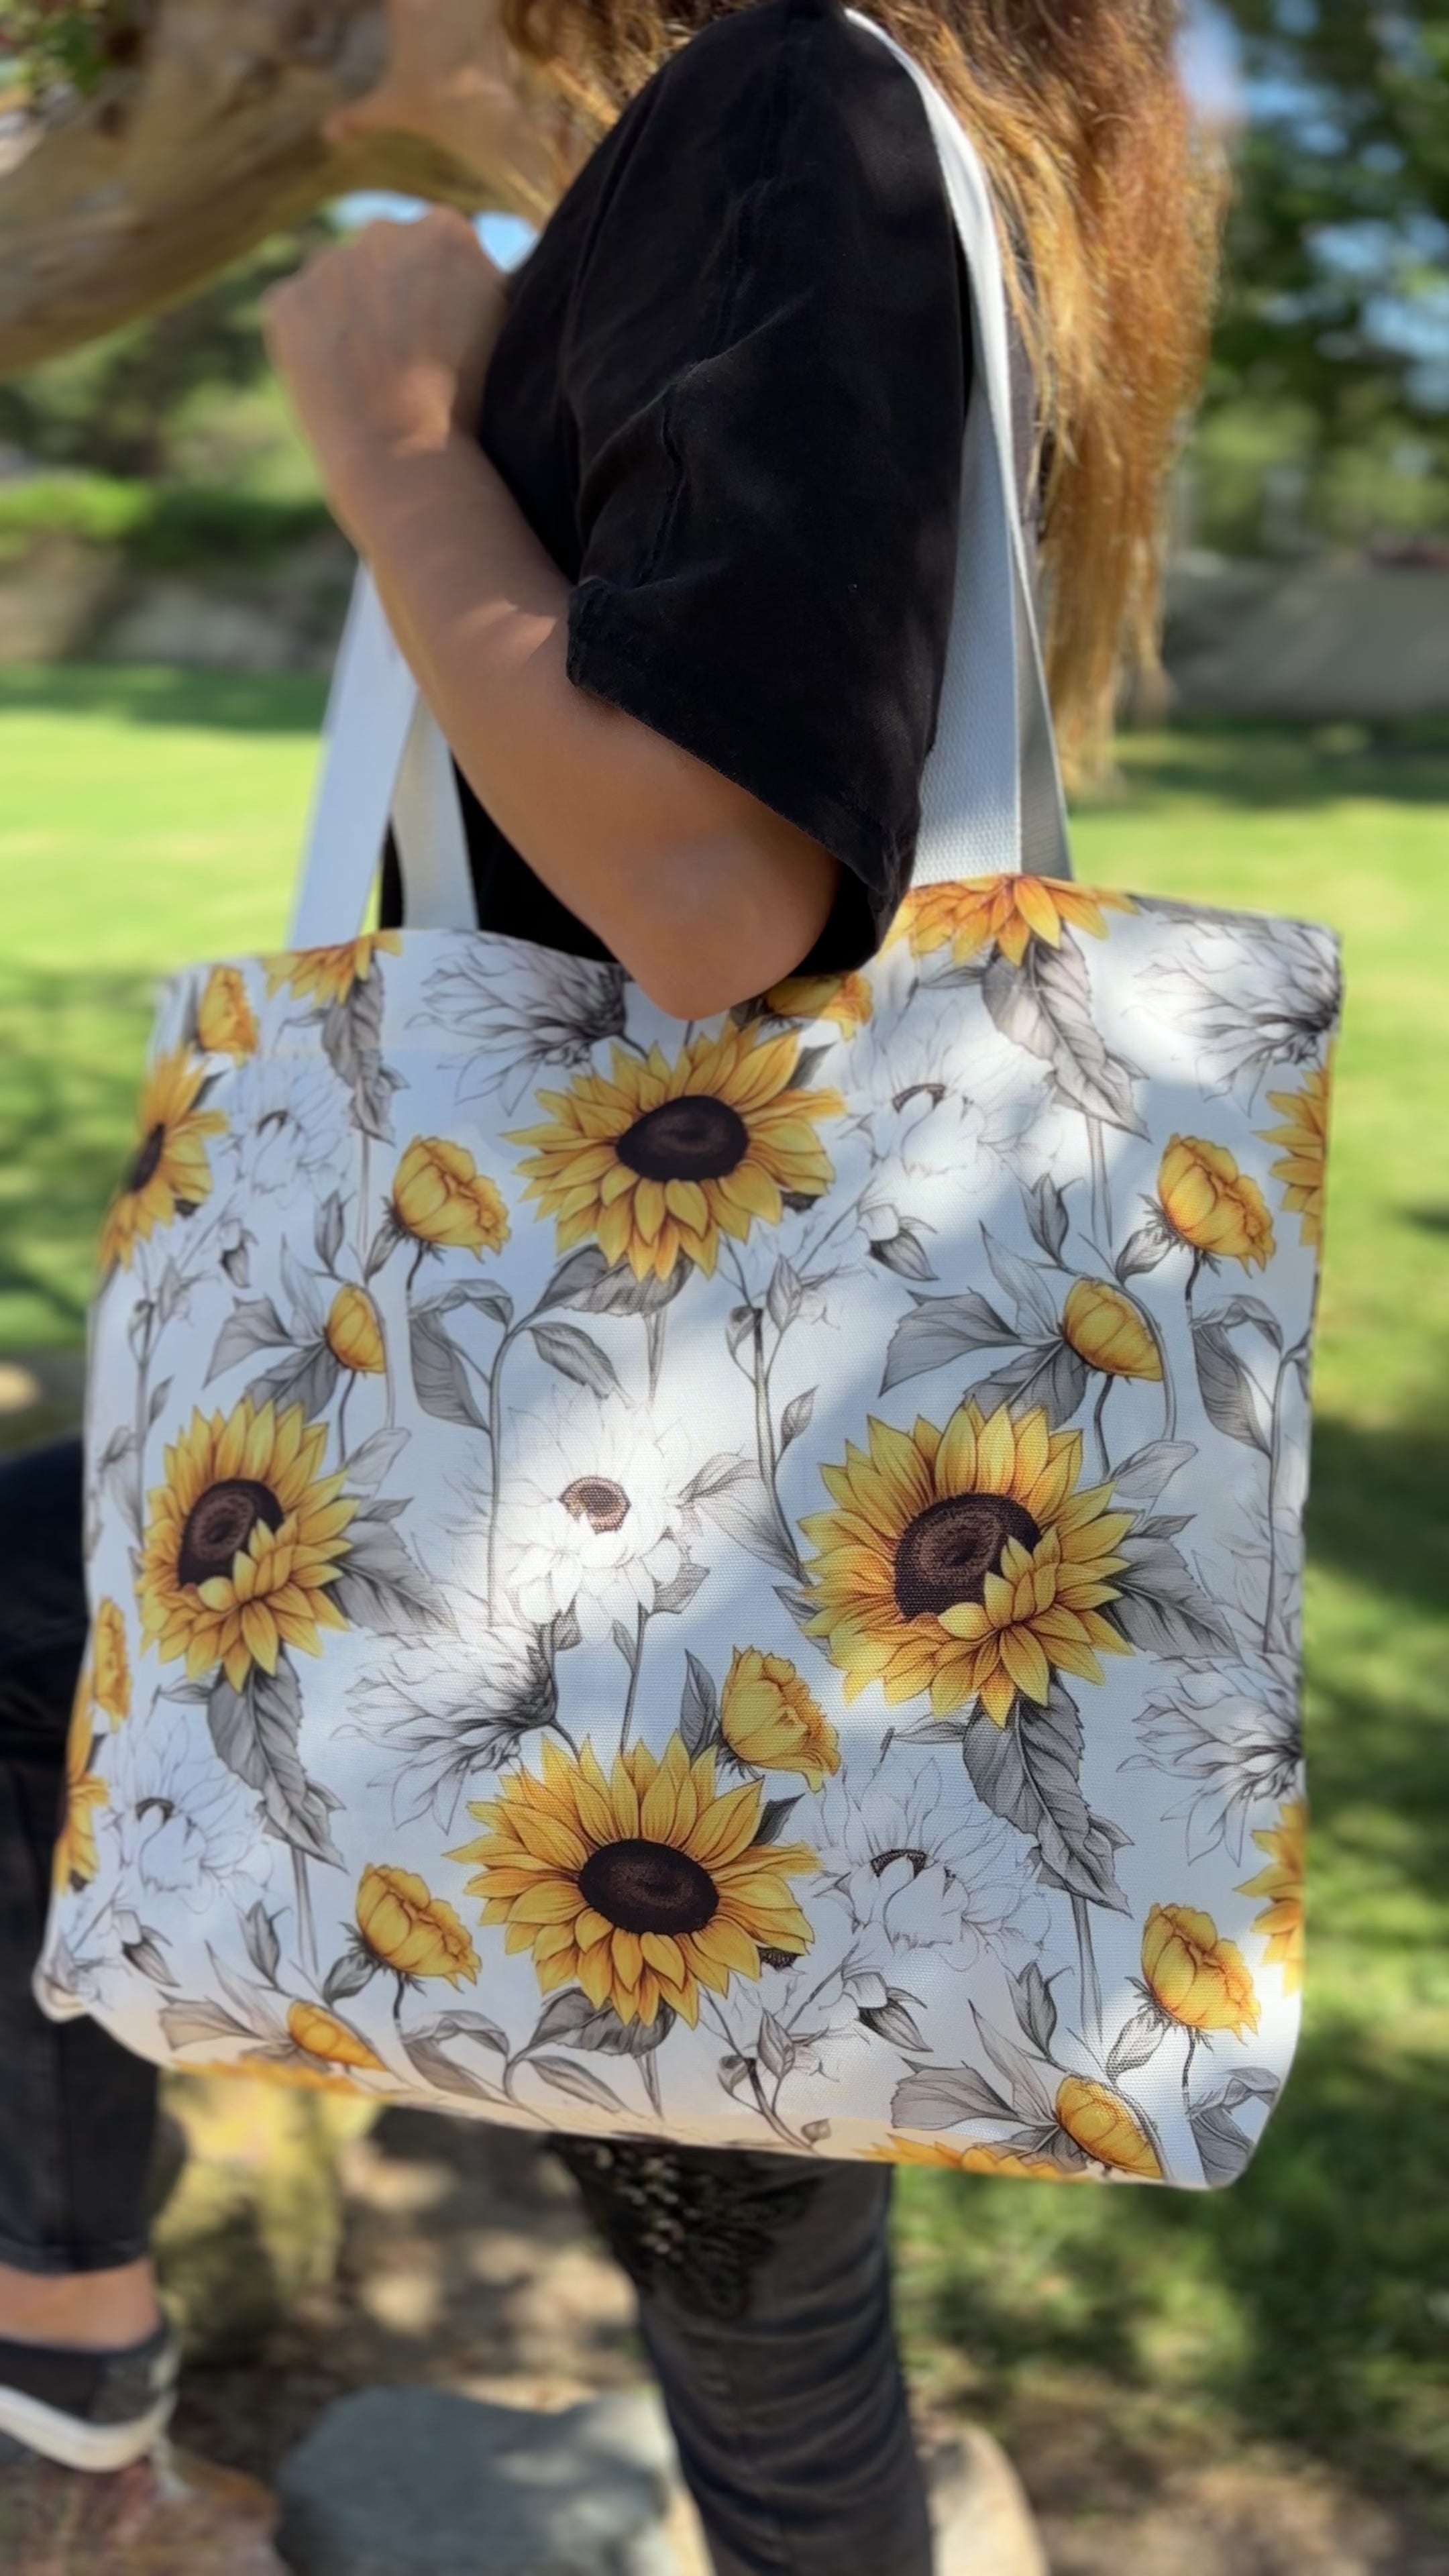 Sunflower Bliss Tote Bag: Carry the Sunshine Everywhere You Go